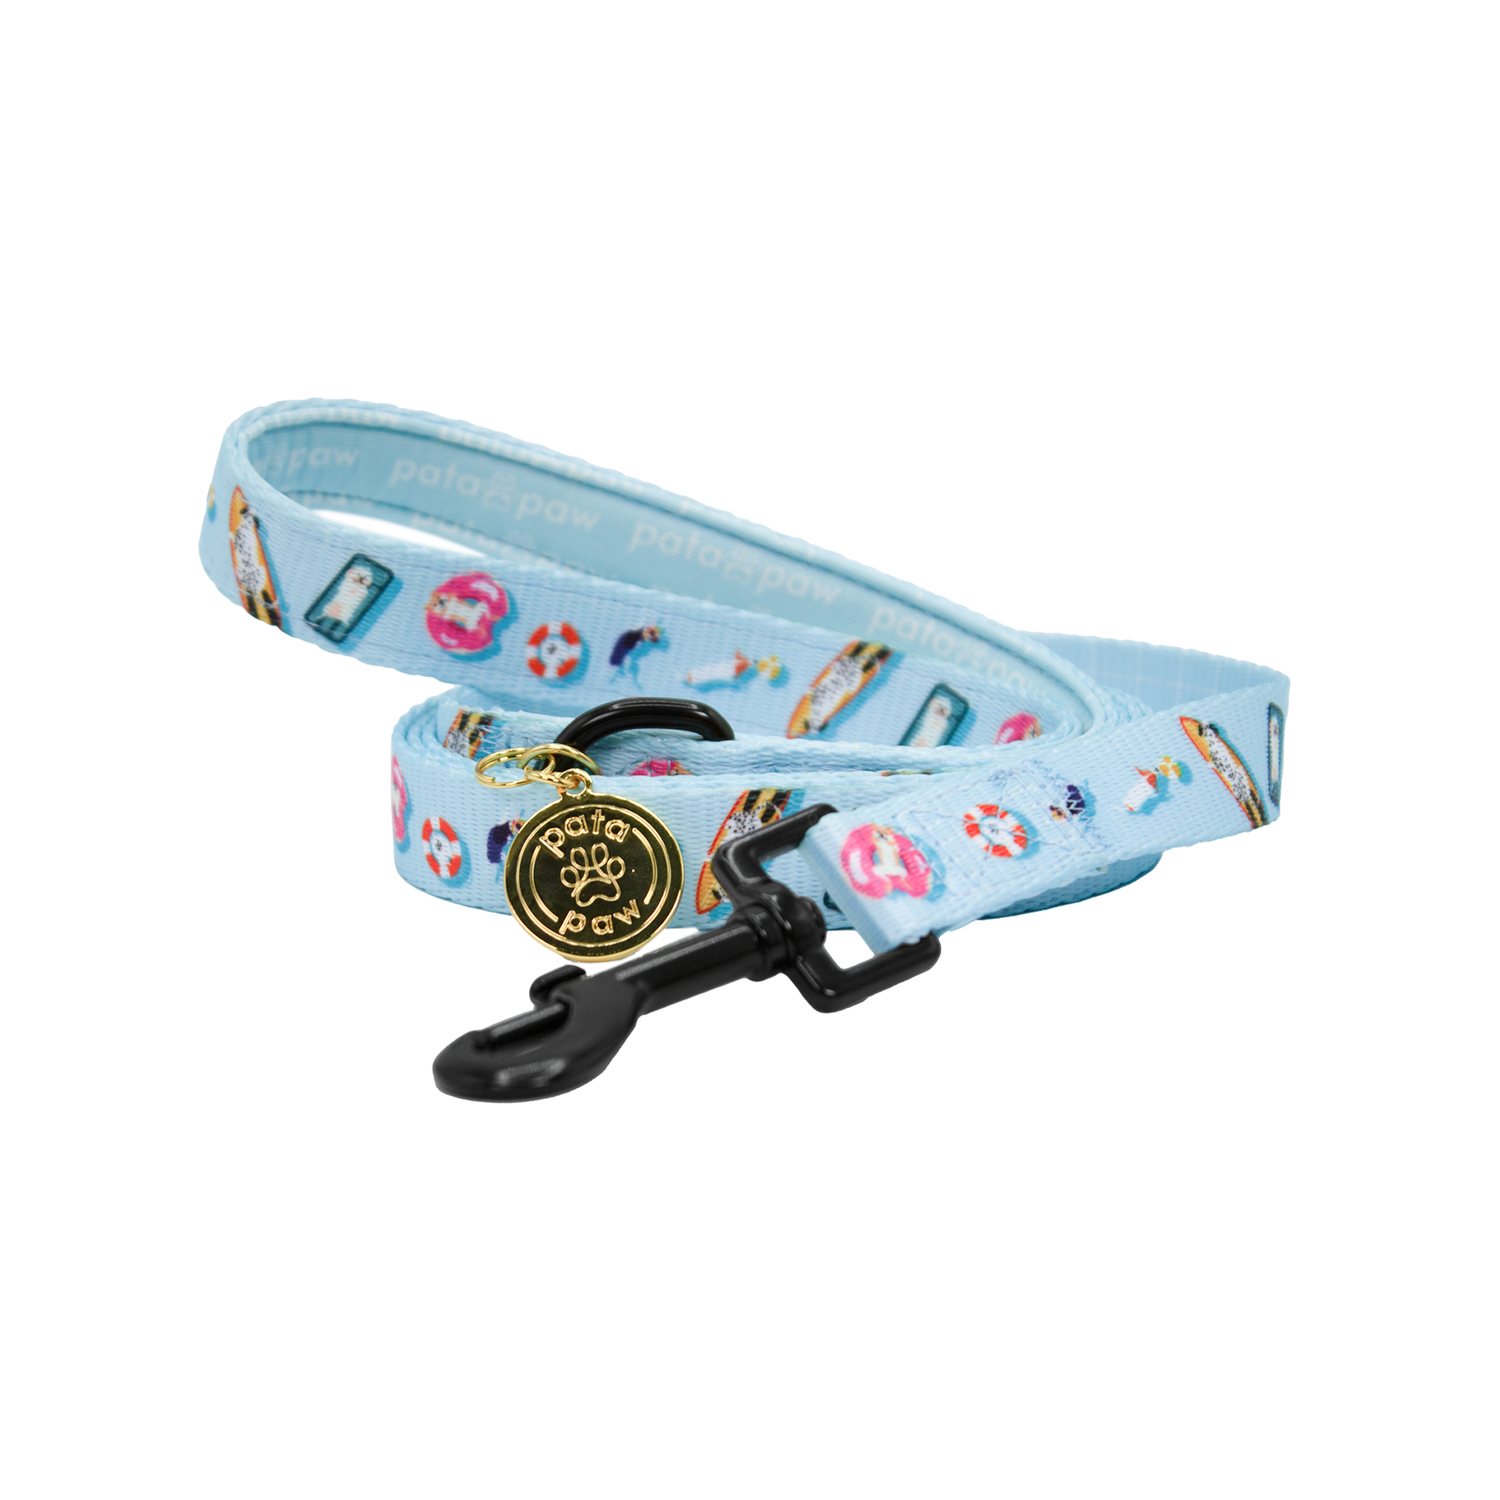 pata paw pool pups leash rolled up